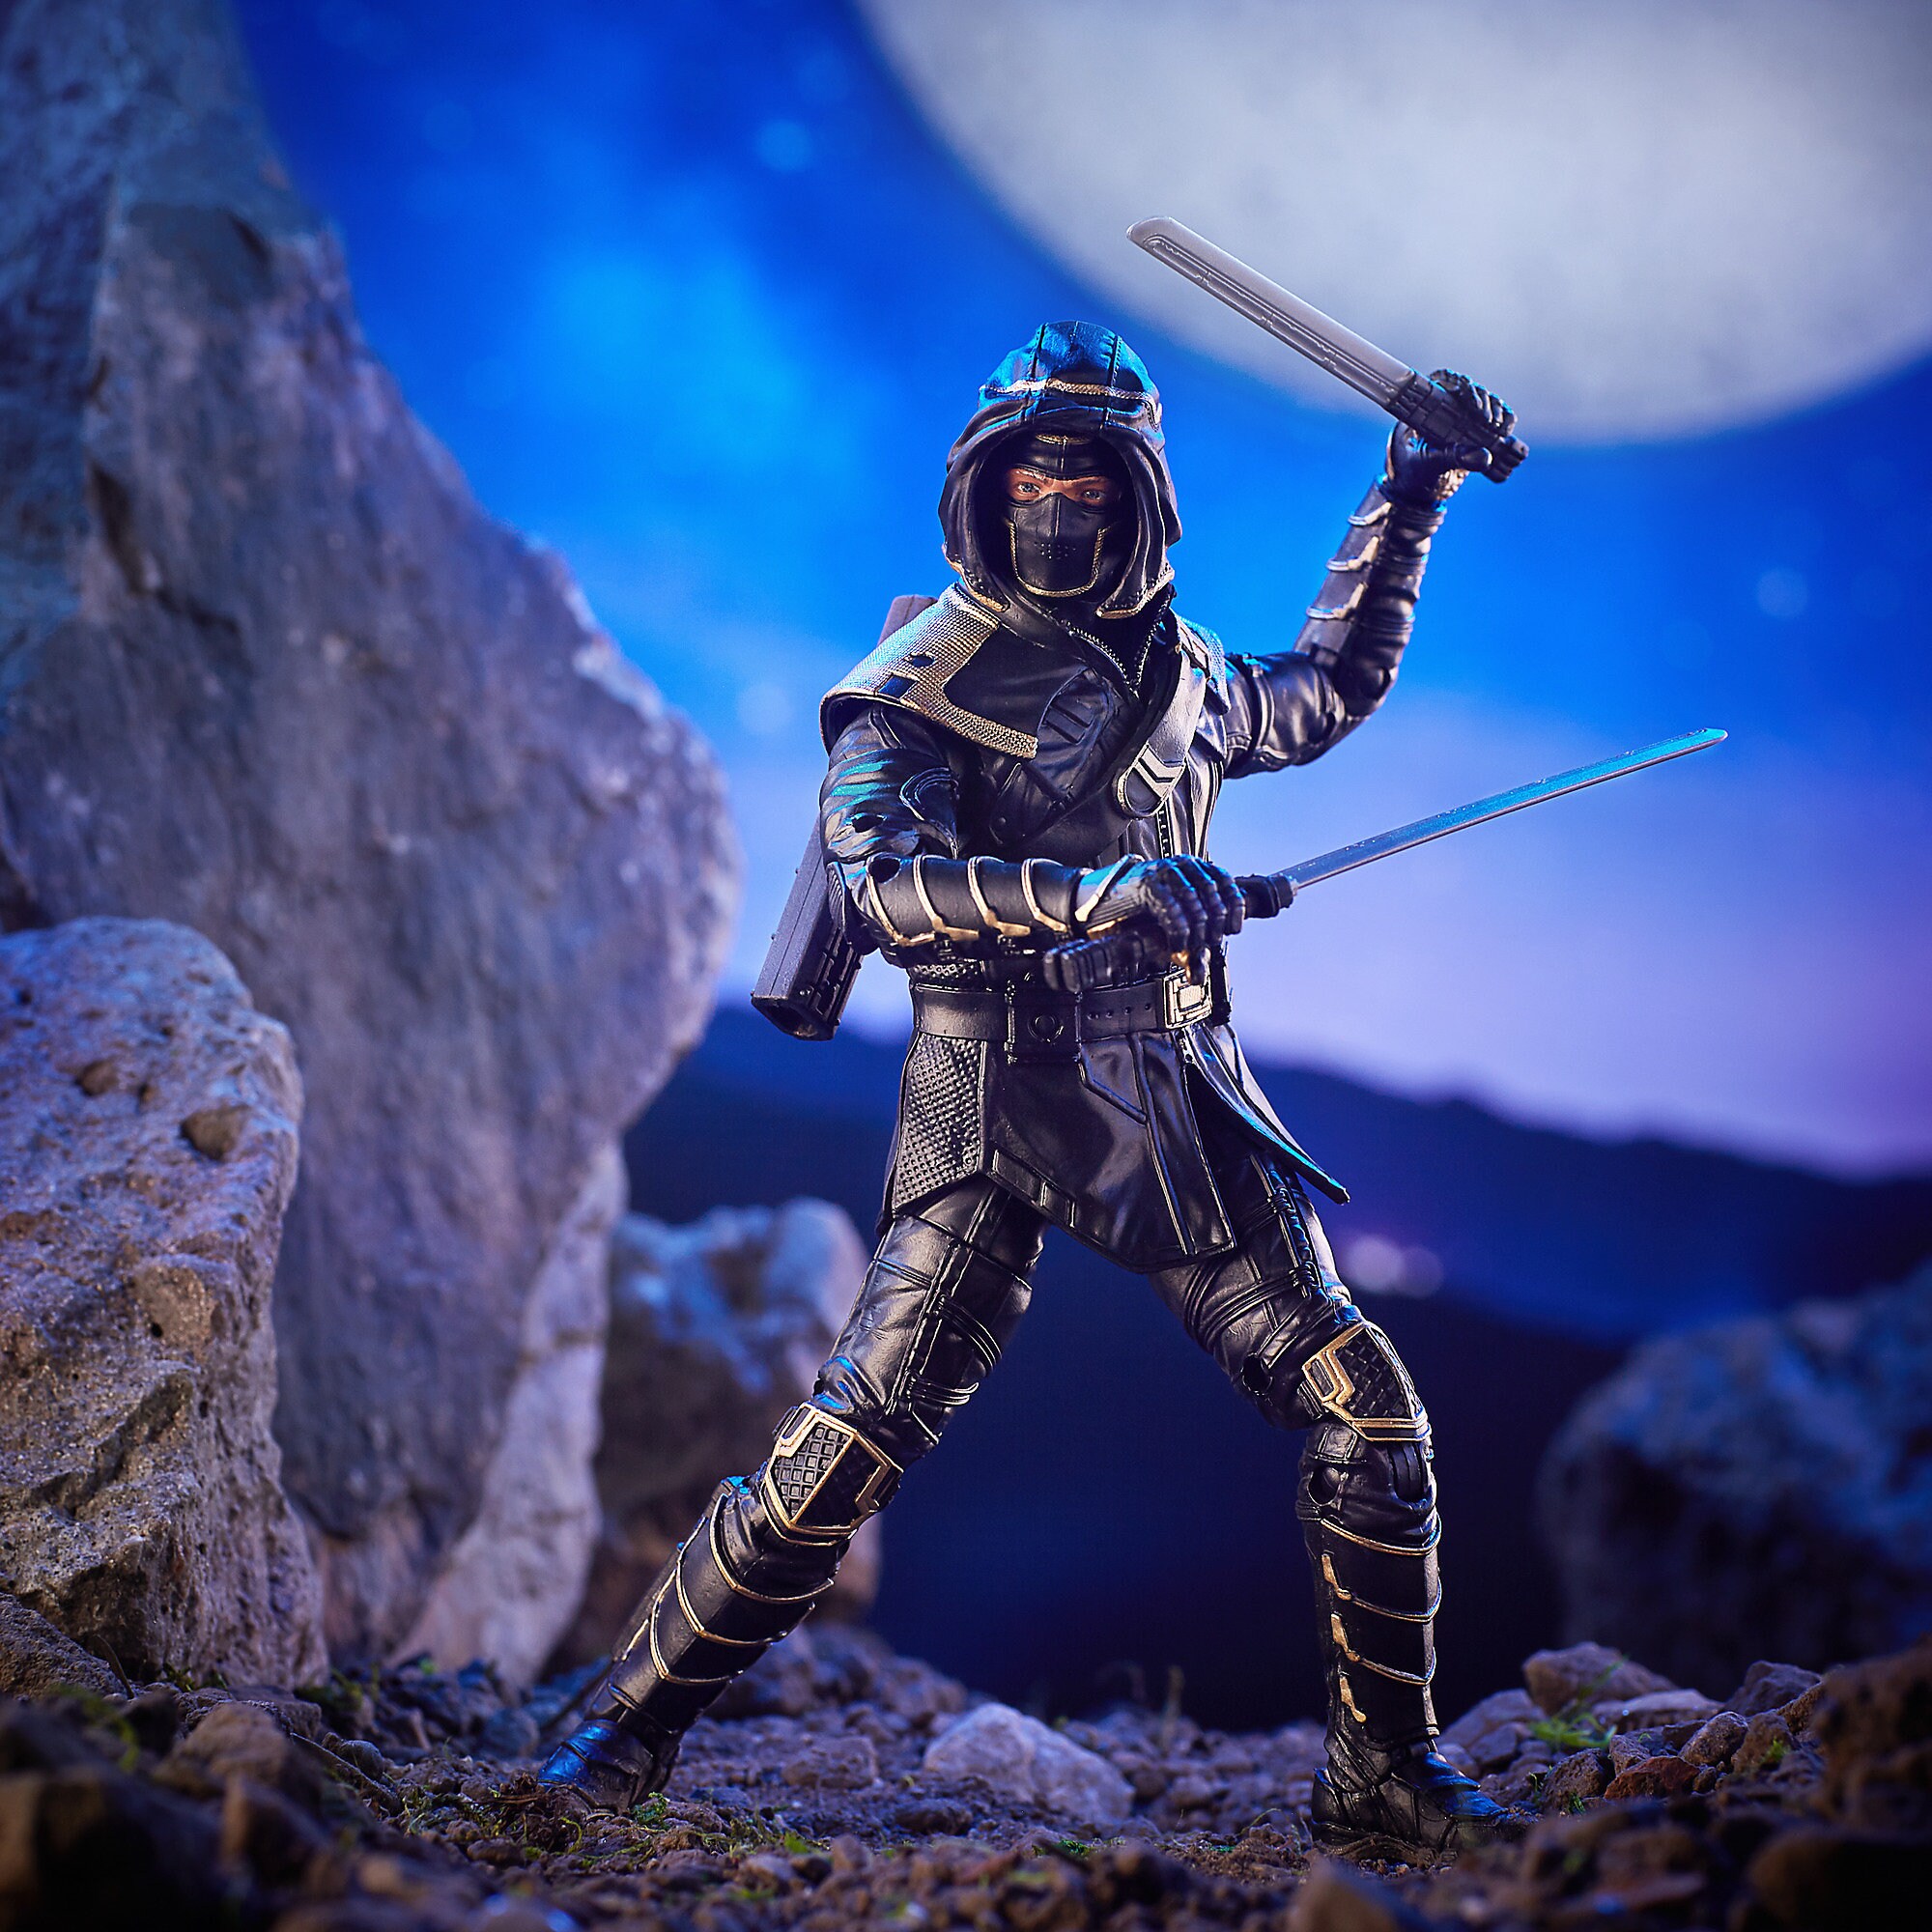 Ronin Action Figure - Legends Series was released today – Dis